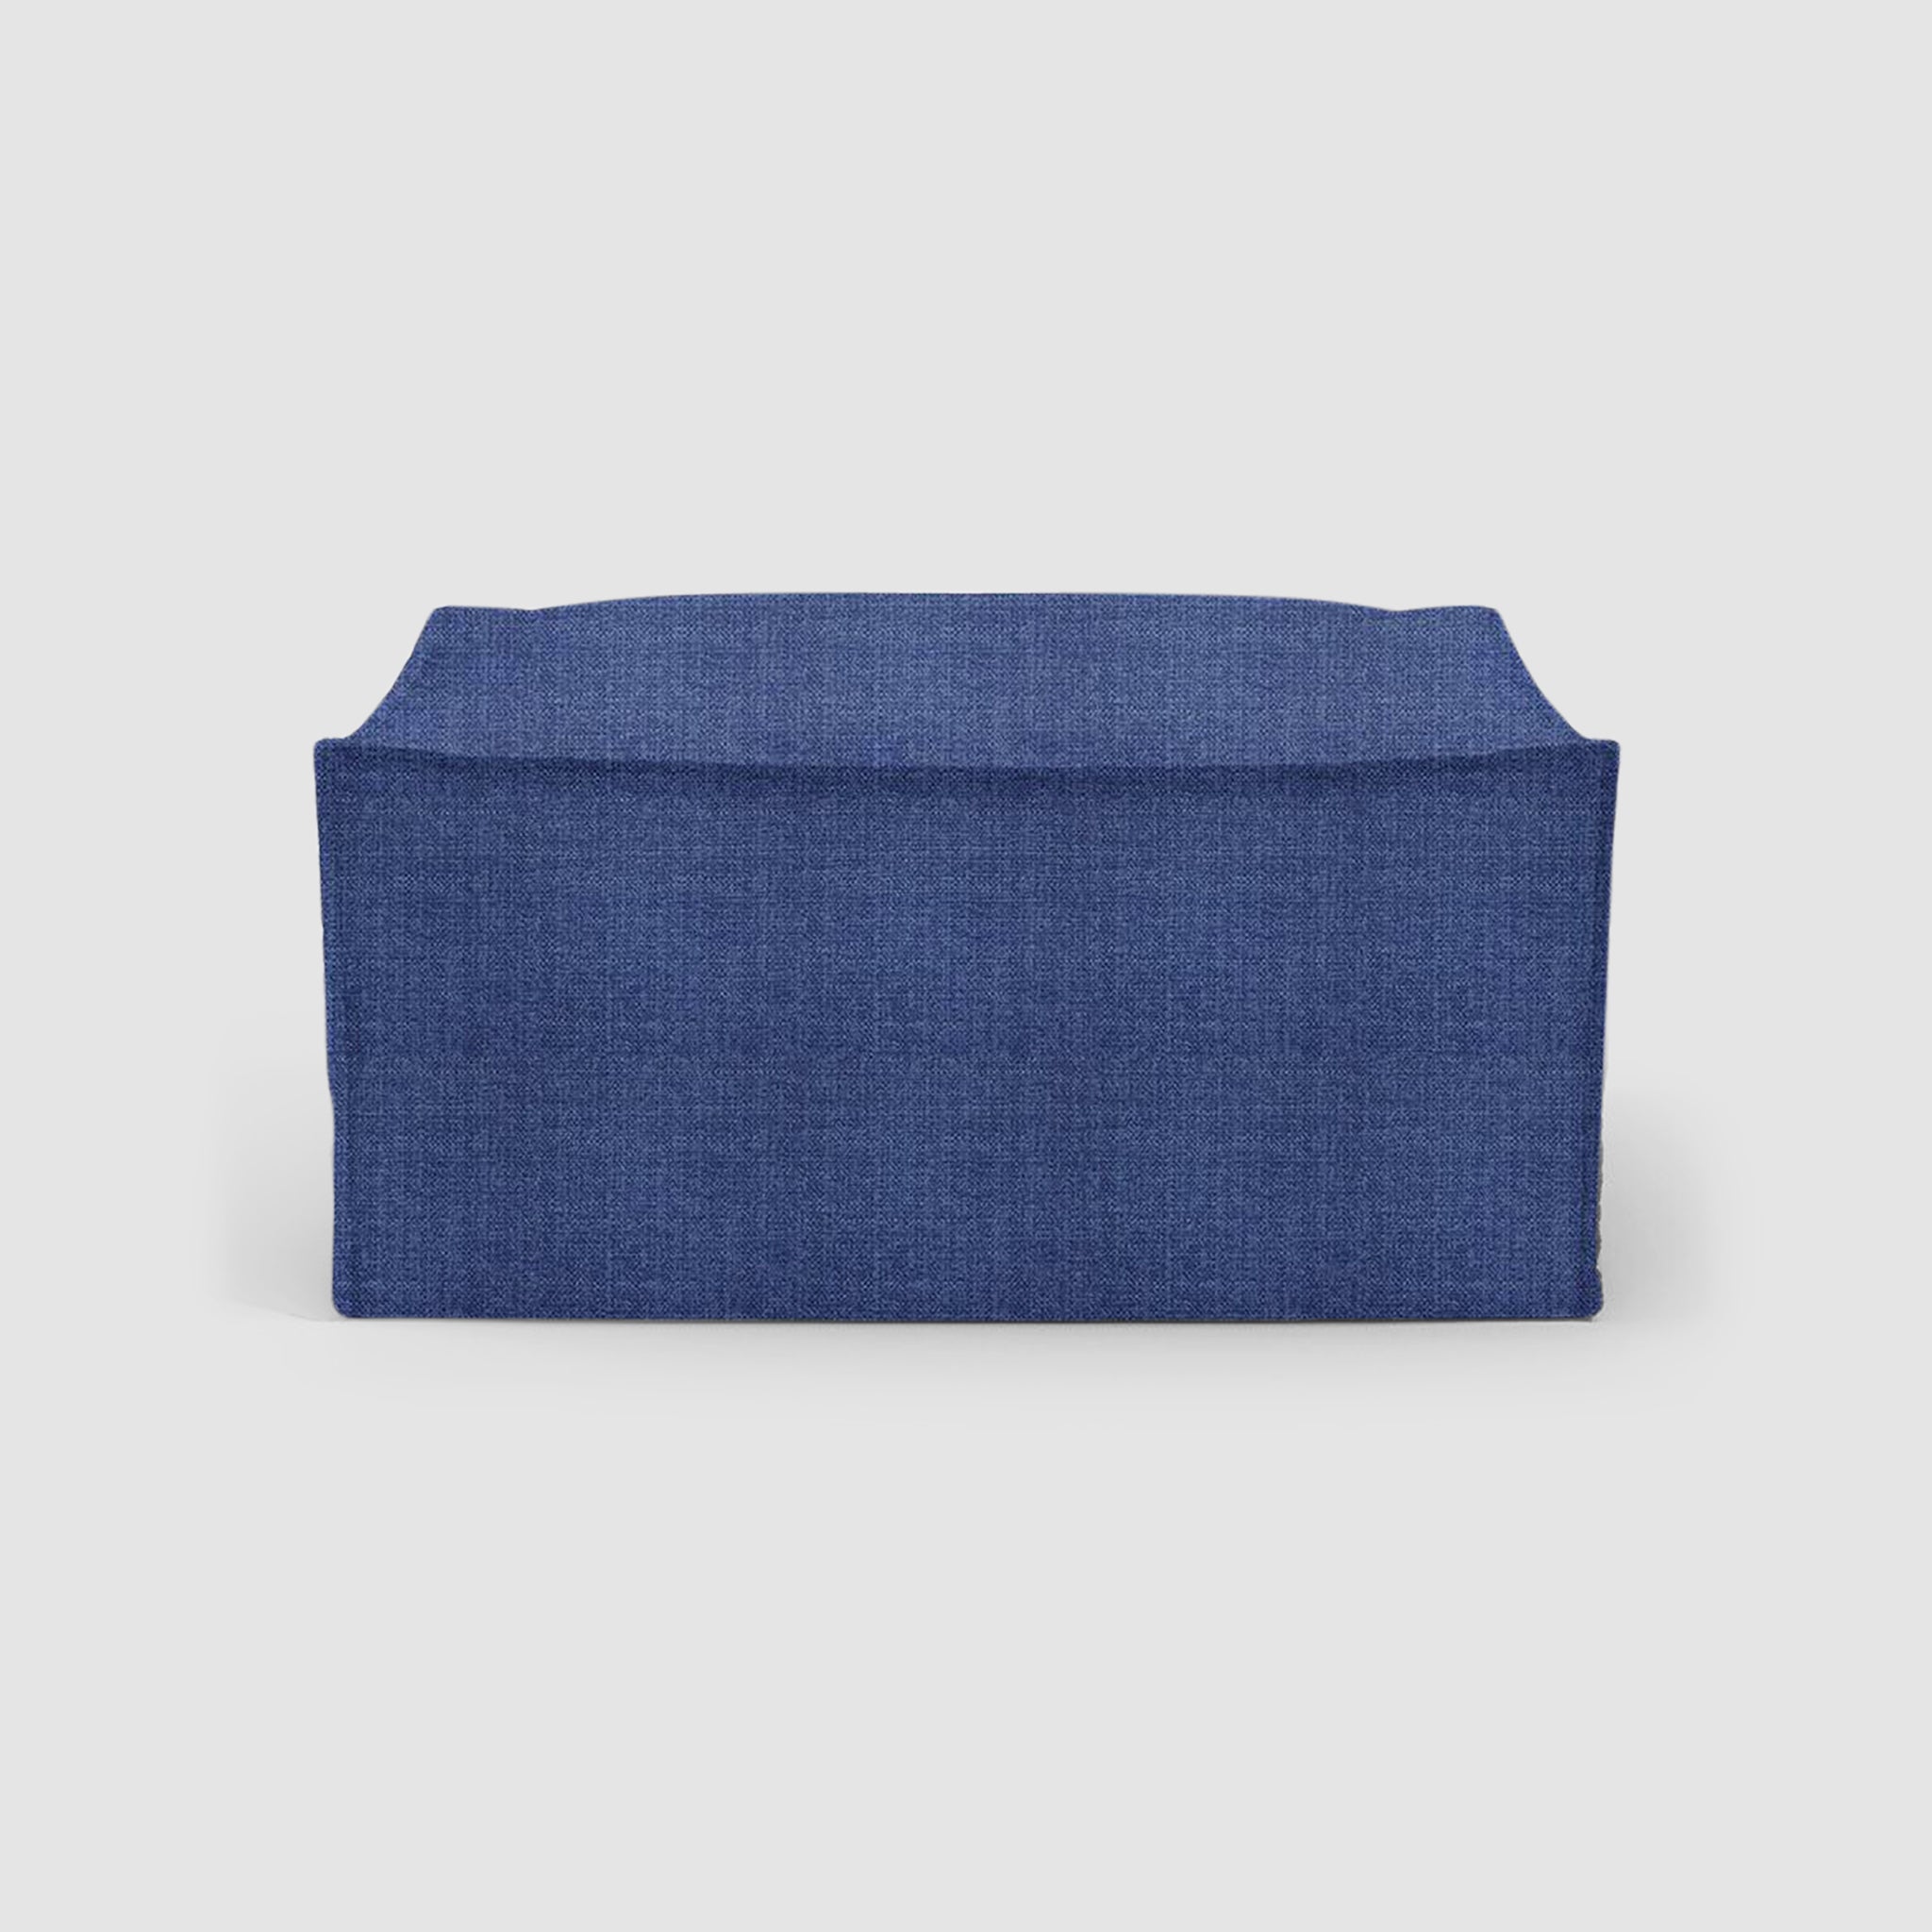 Blue fabric ottoman with a sleek, modern design, perfect for adding a pop of color and extra seating to any living space.